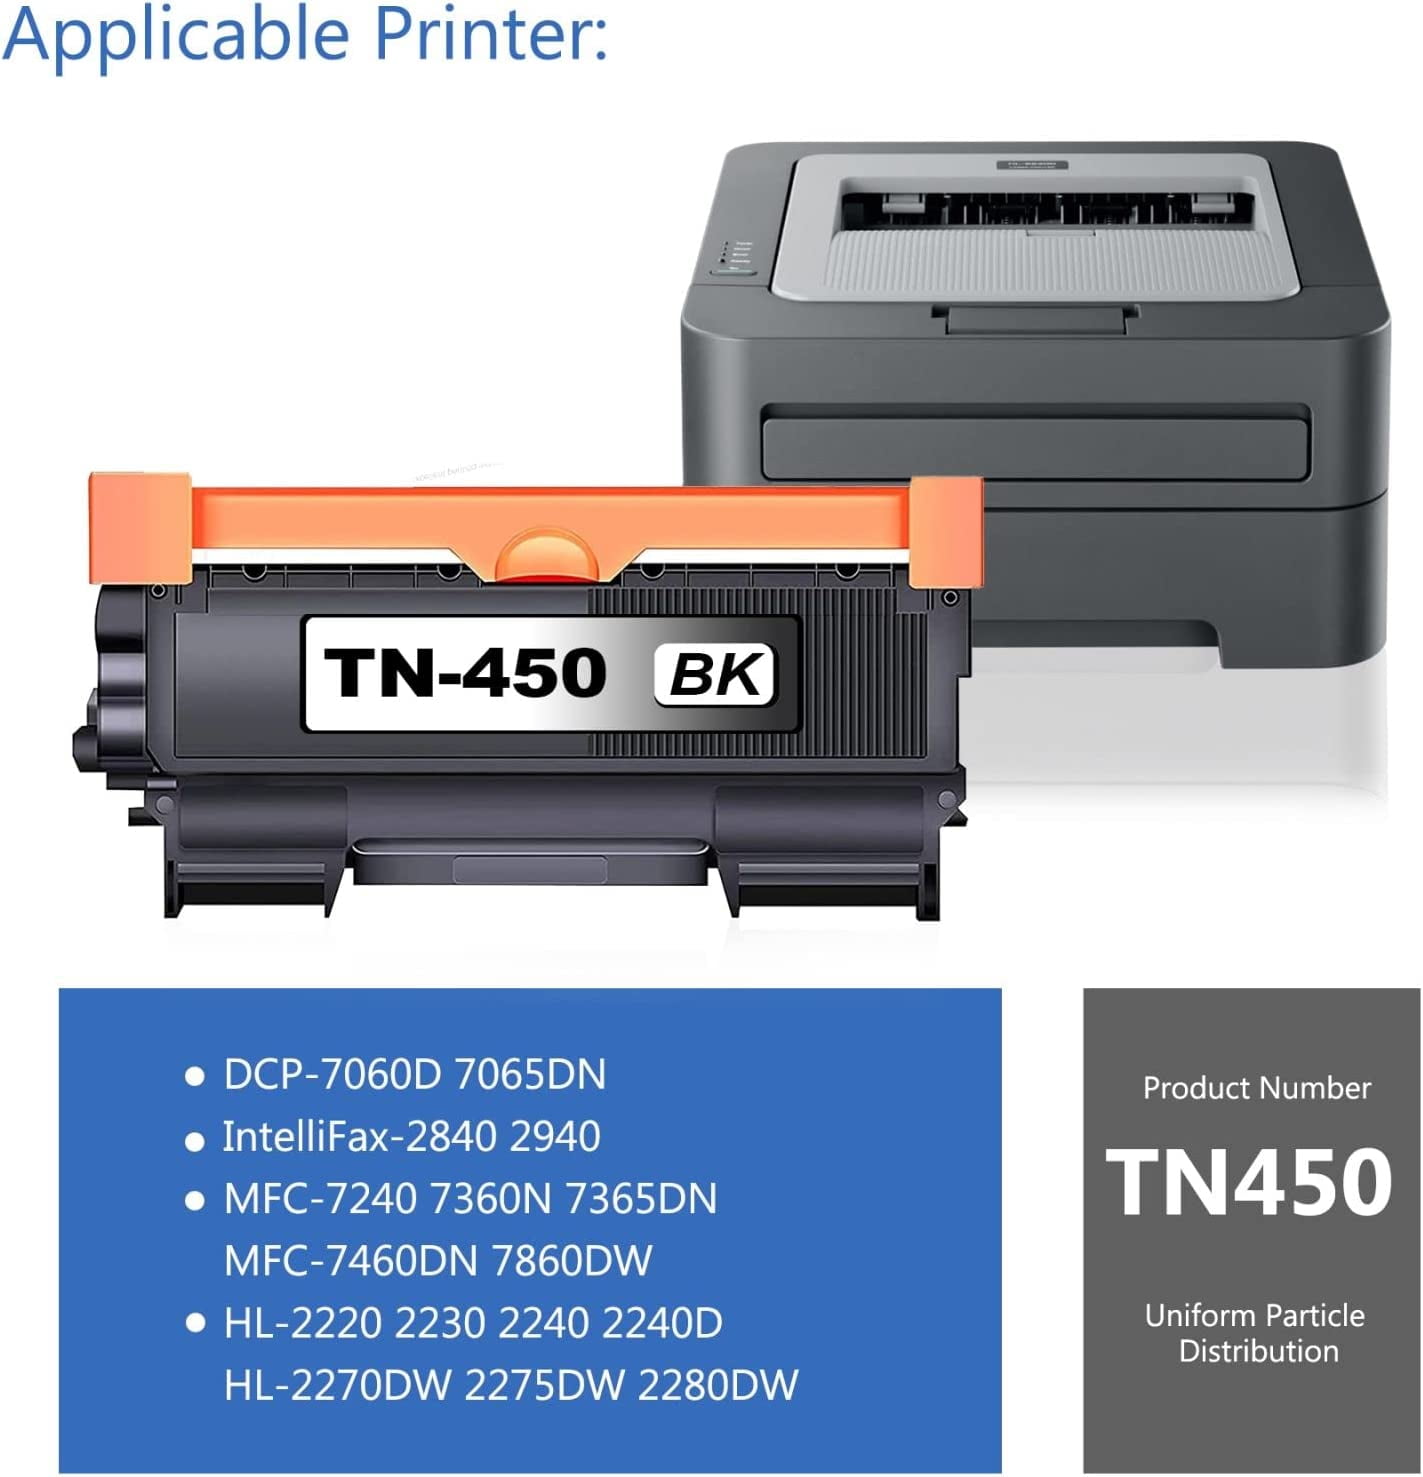 TN450 1 Pack Black Toner Cartidge Replacement for Brother DCP-7060D Printer -